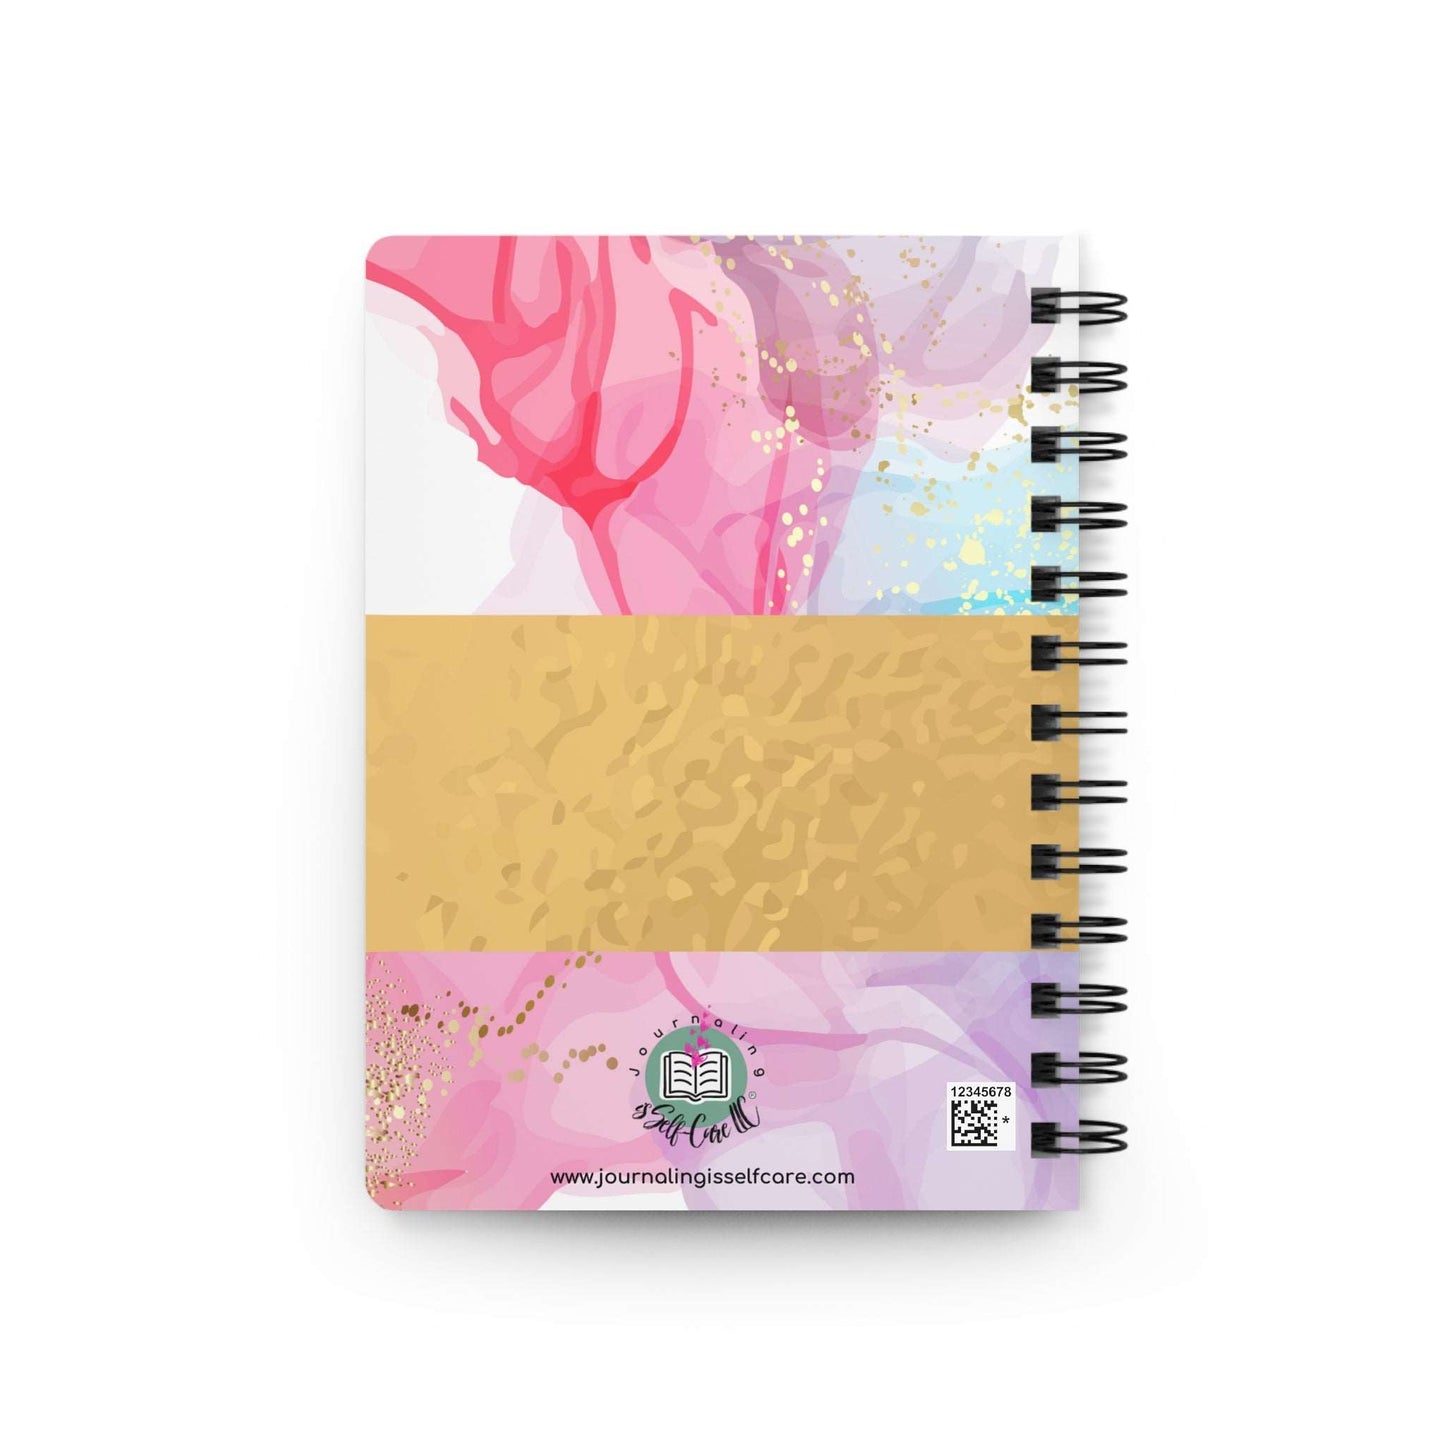 A spiral notebook with a pink and gold cover, perfect for capturing moments of gratitude in a Grateful Journal.